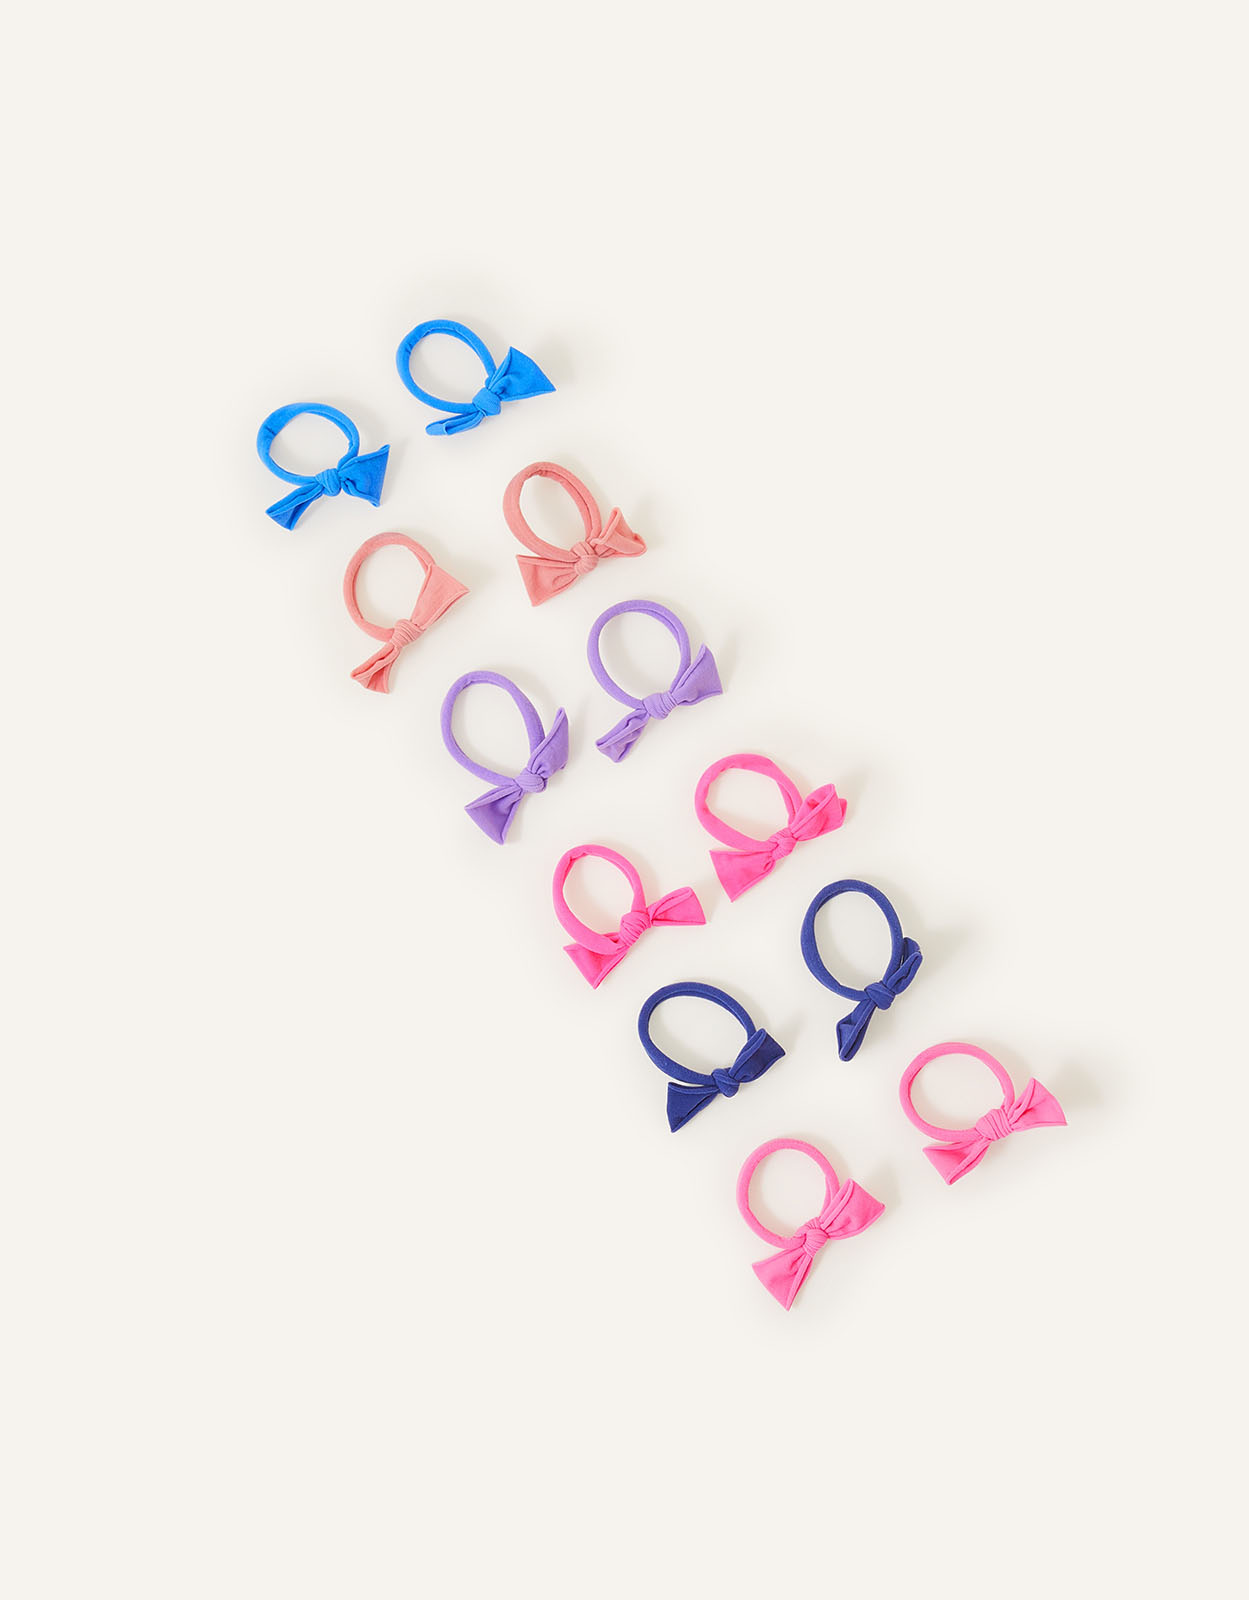 Accessorize Girl's Pink/Blue Mini Hairband Multipack, Size: One Size